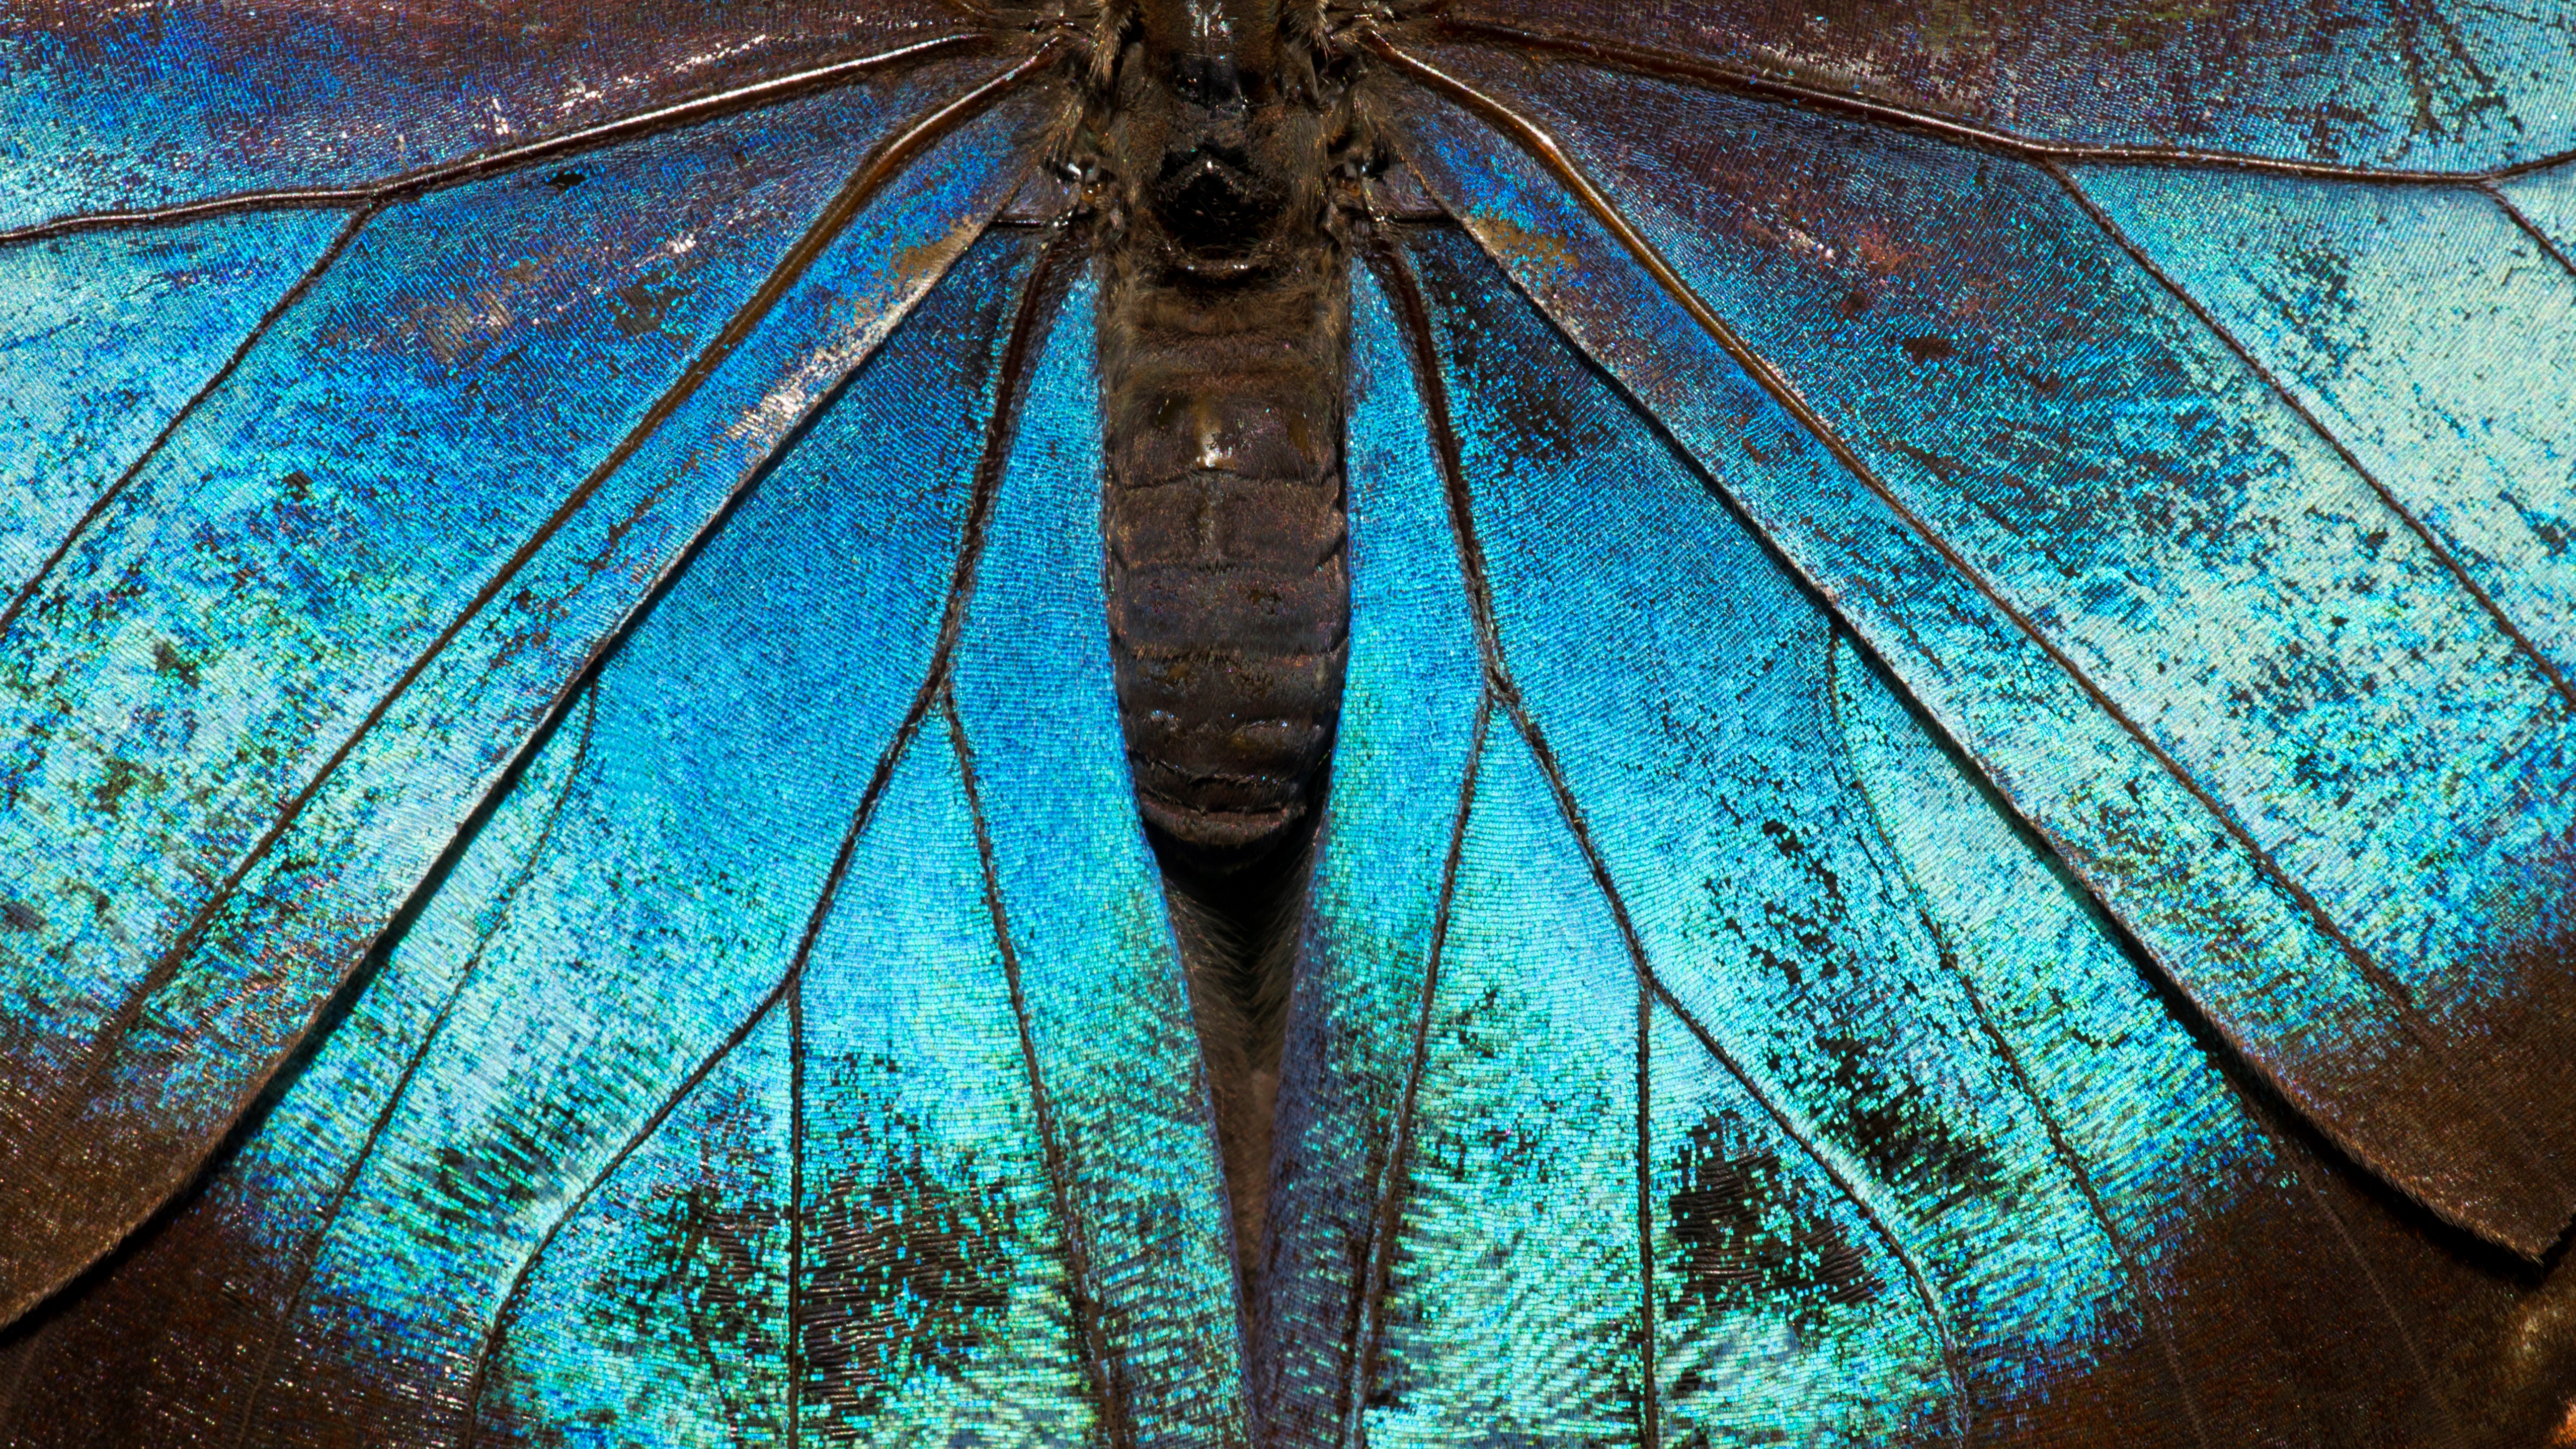 Butterflies evolved 100 million years ago in North America